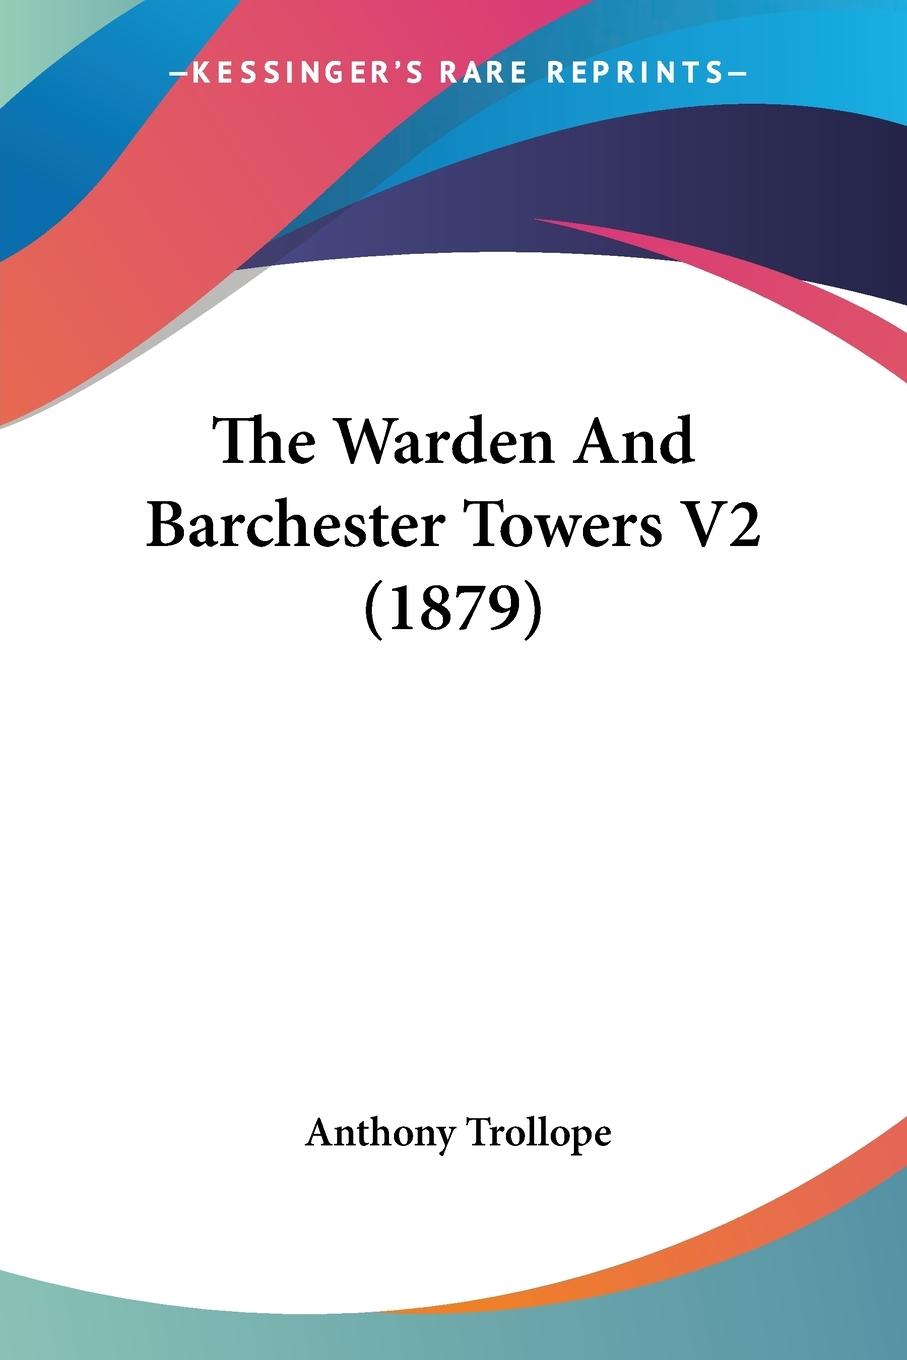 The Warden And Barchester Towers V2 (1879) / Anthony Trollope / Taschenbuch / Paperback / Englisch / 2009 / Kessinger Publishing, LLC / EAN 9781120342171 - Trollope, Anthony